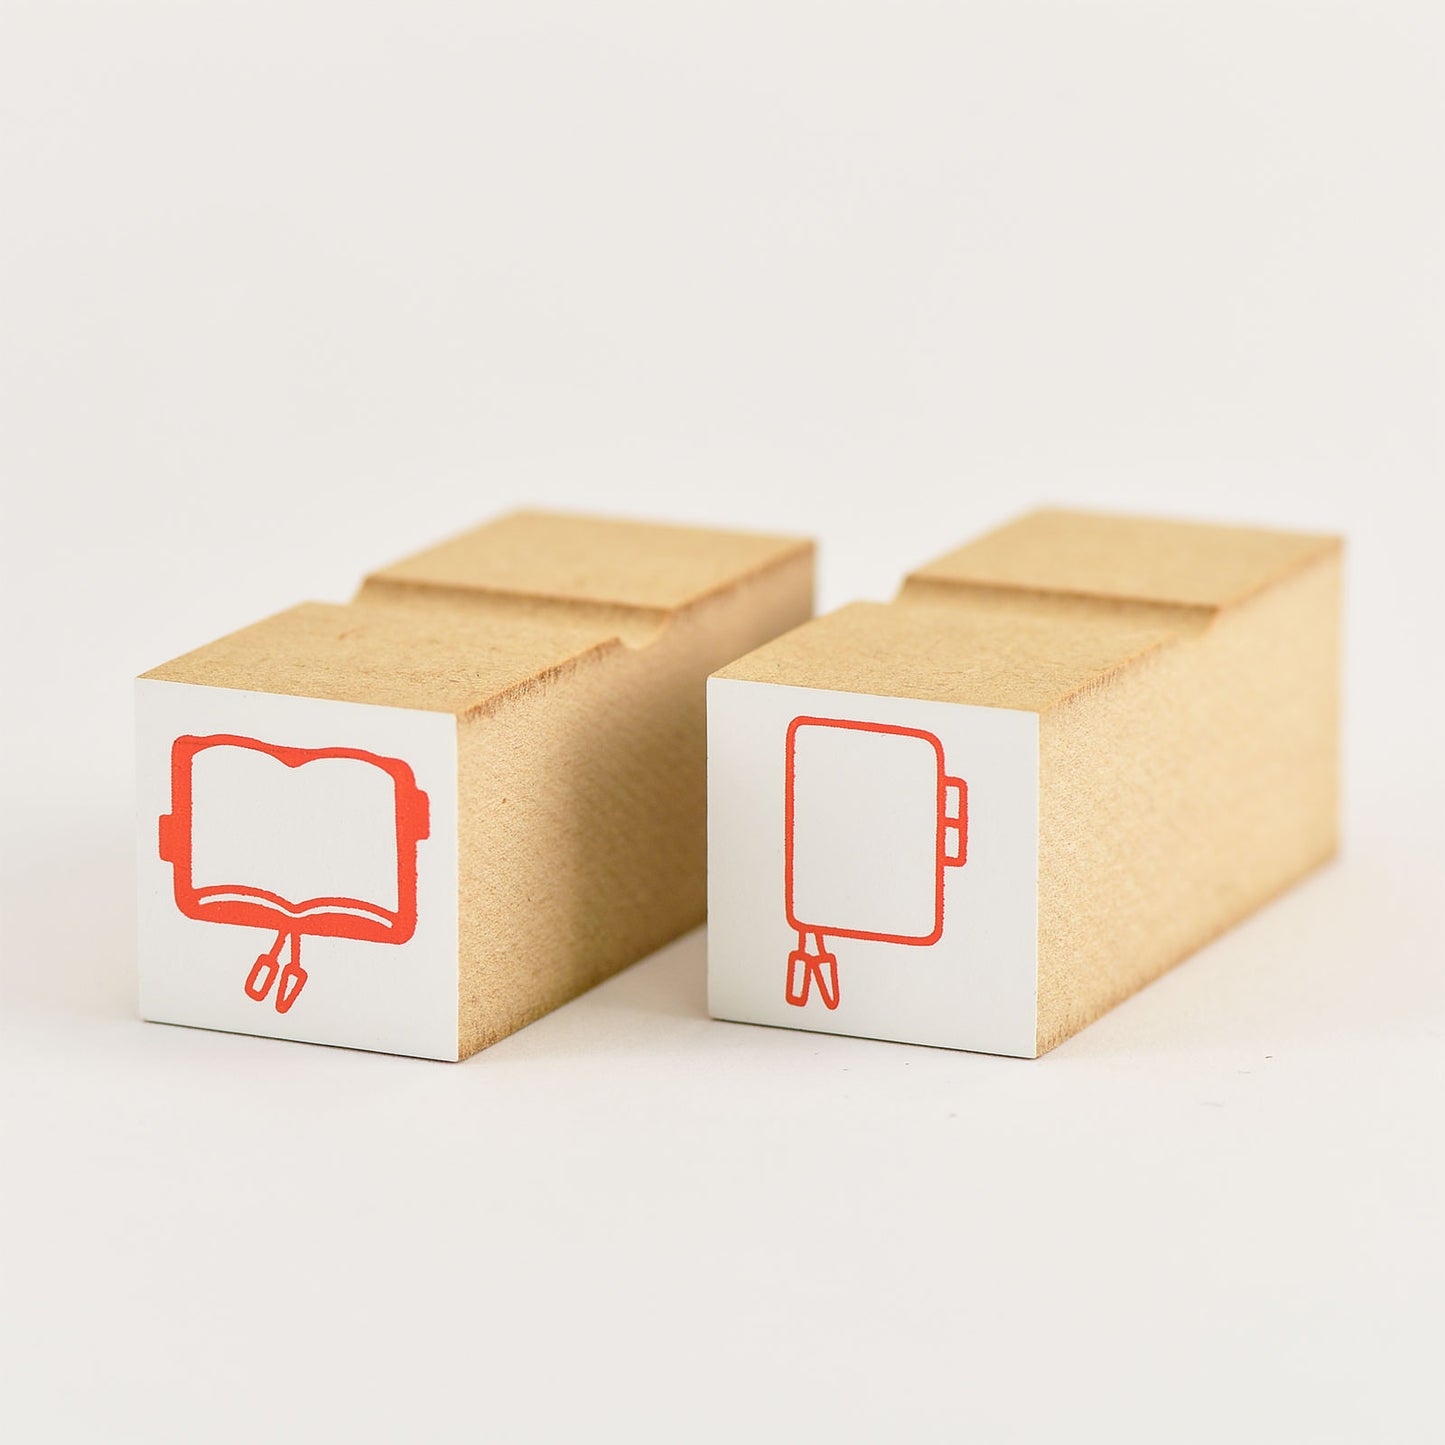 Hobonichi Techo Wooden Rubber Stamps